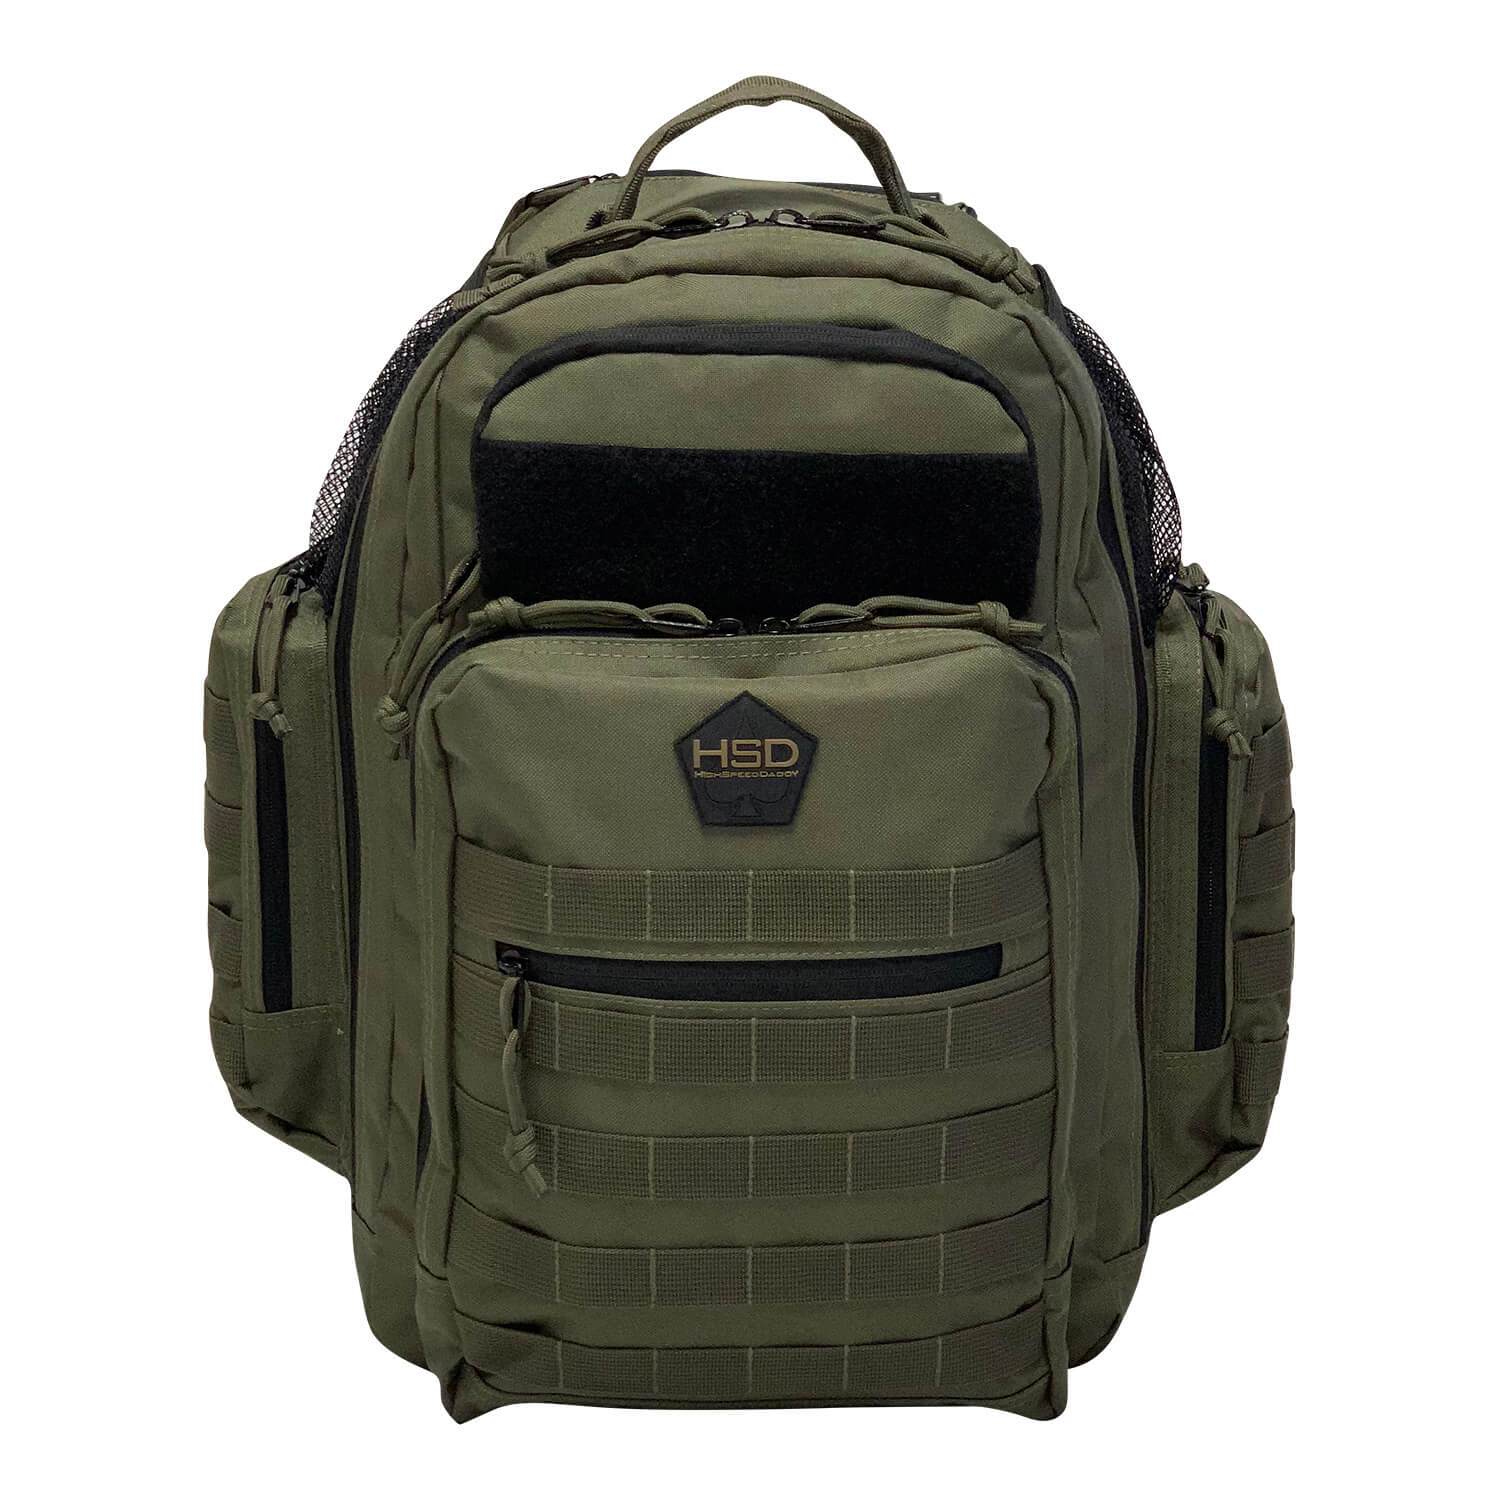 HighSpeedDaddy  Diaper bag backpacks and gear for people on the go